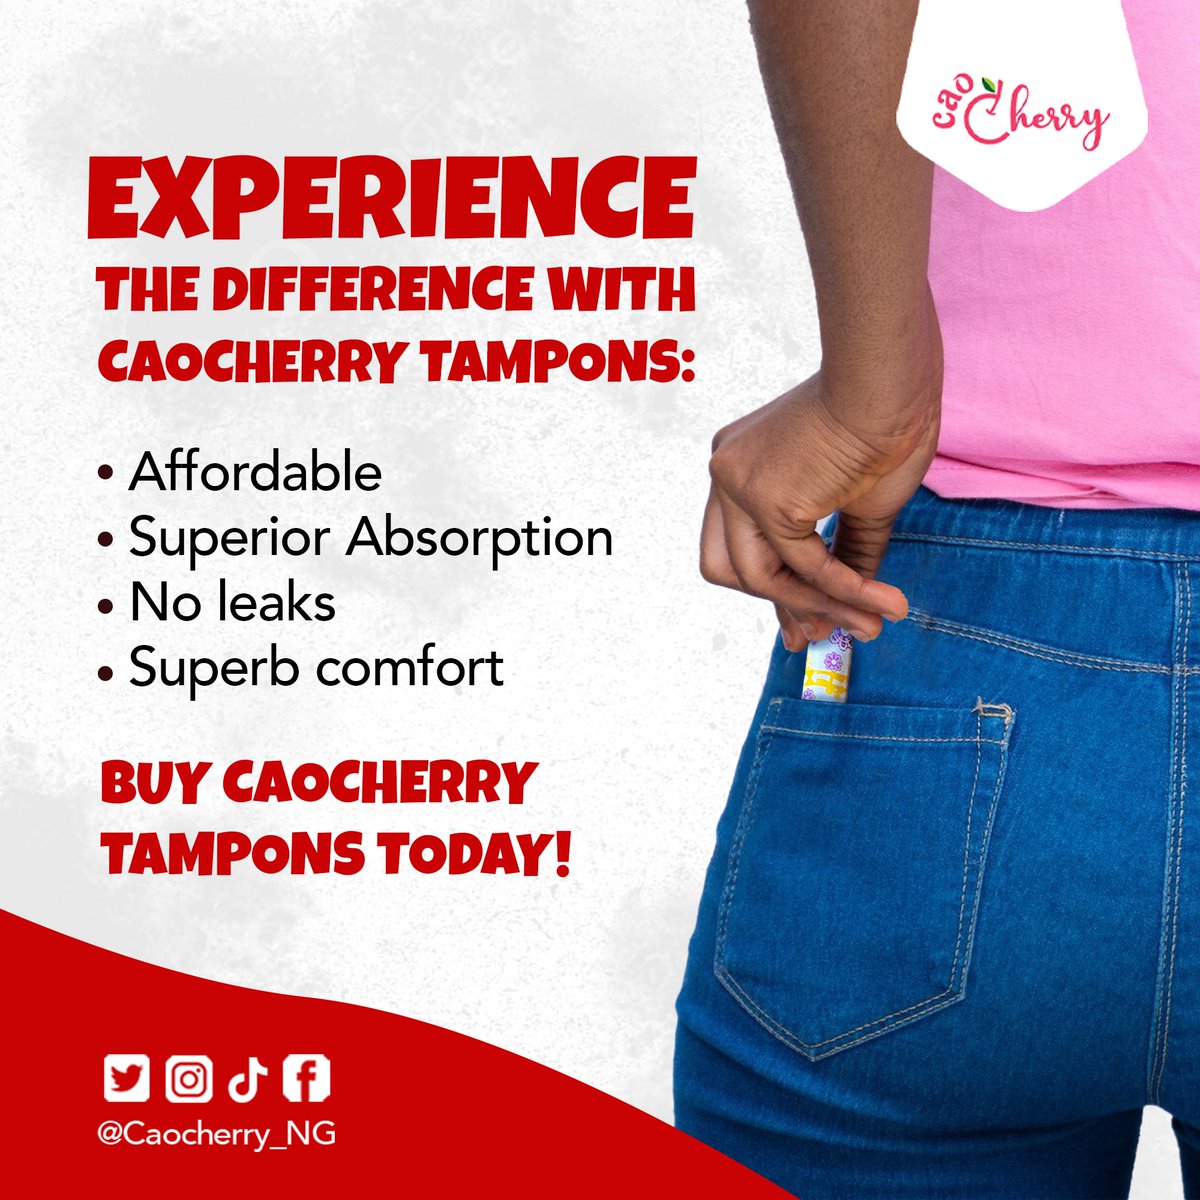 Experience the excellence of our tampons that are designed specifically with women in mind.

- Affordable
- Superior Absorption
- No leaks
- Superb comfort

Buy Caocherry tampons today!

#PeriodSupport #FeminineCare #MenstrualHealth #MenstrualEducation #CAOCherrytampons